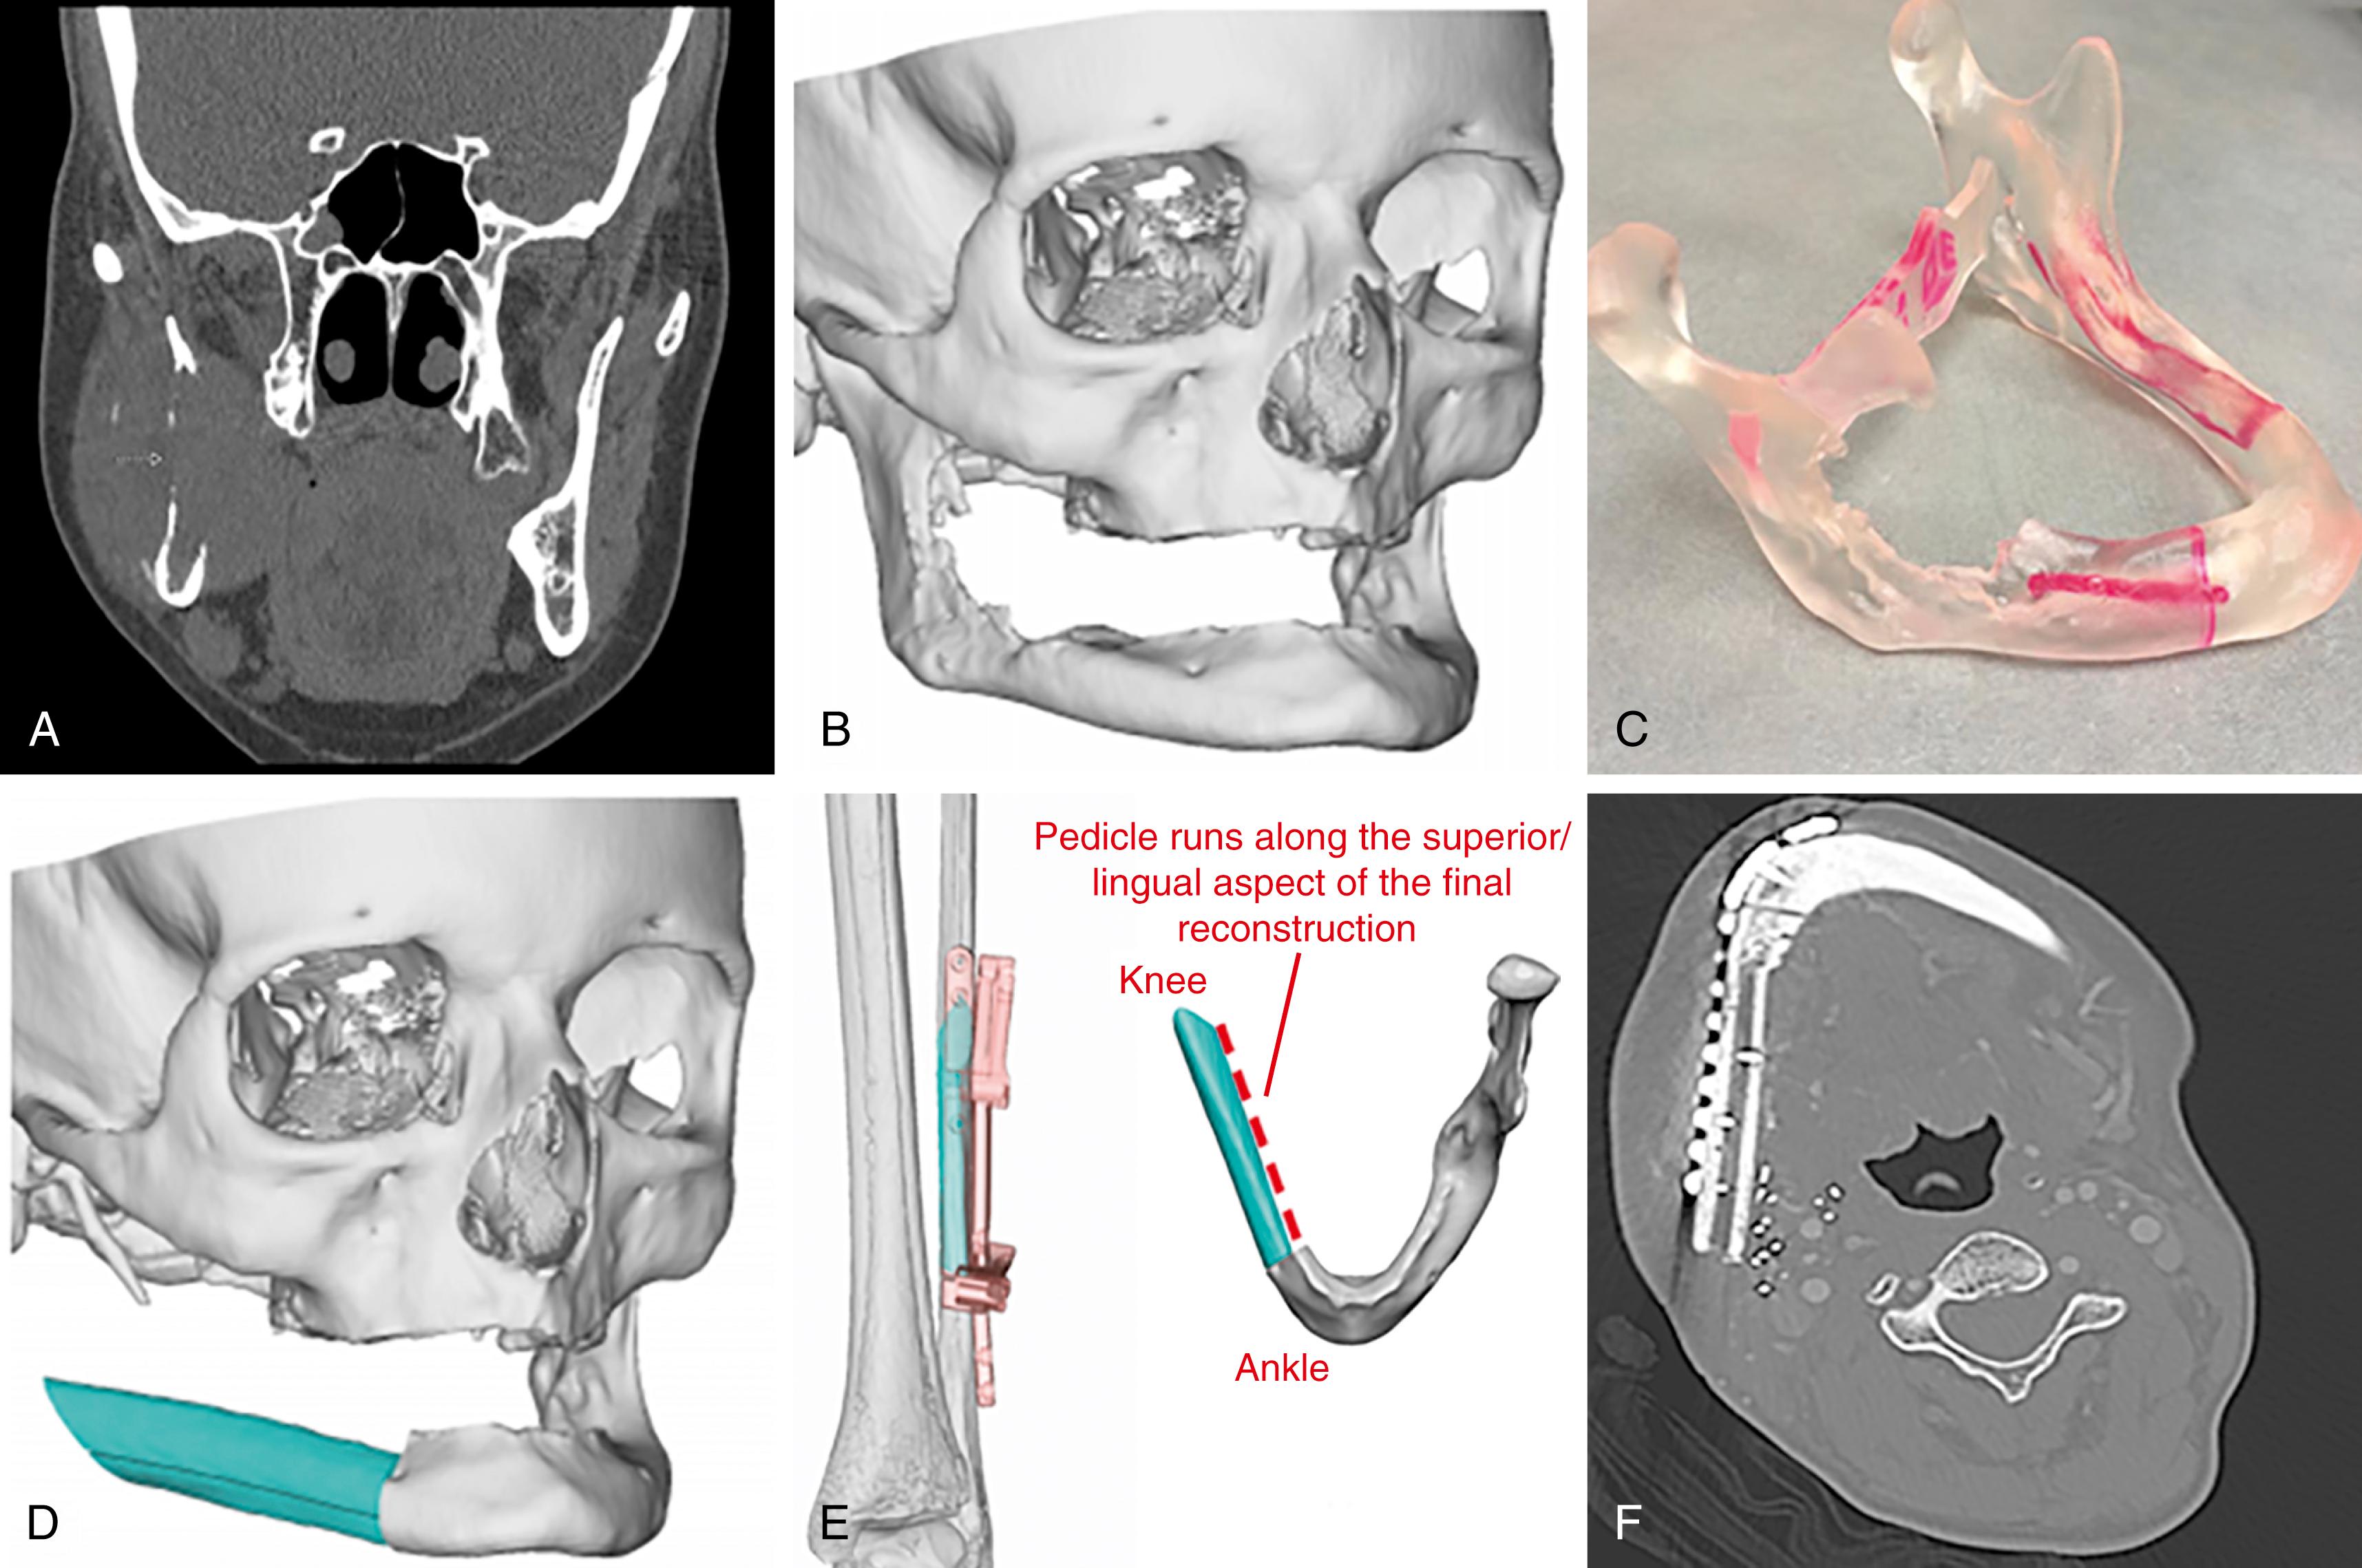 Fig. 182.1, A, A computed tomography (CT) scan of a patient demonstrating carcinoma that eroded the ramus of the mandible. B, Three-dimensional reconstruction for virtual surgical planning. C, Three-dimensional model of mandible preoperatively. D, Virtual plan with fibular reconstruction. E, Fibular resection planning. F, CT scan of postoperative view after osseocutaneous fibular free flap reconstruction.